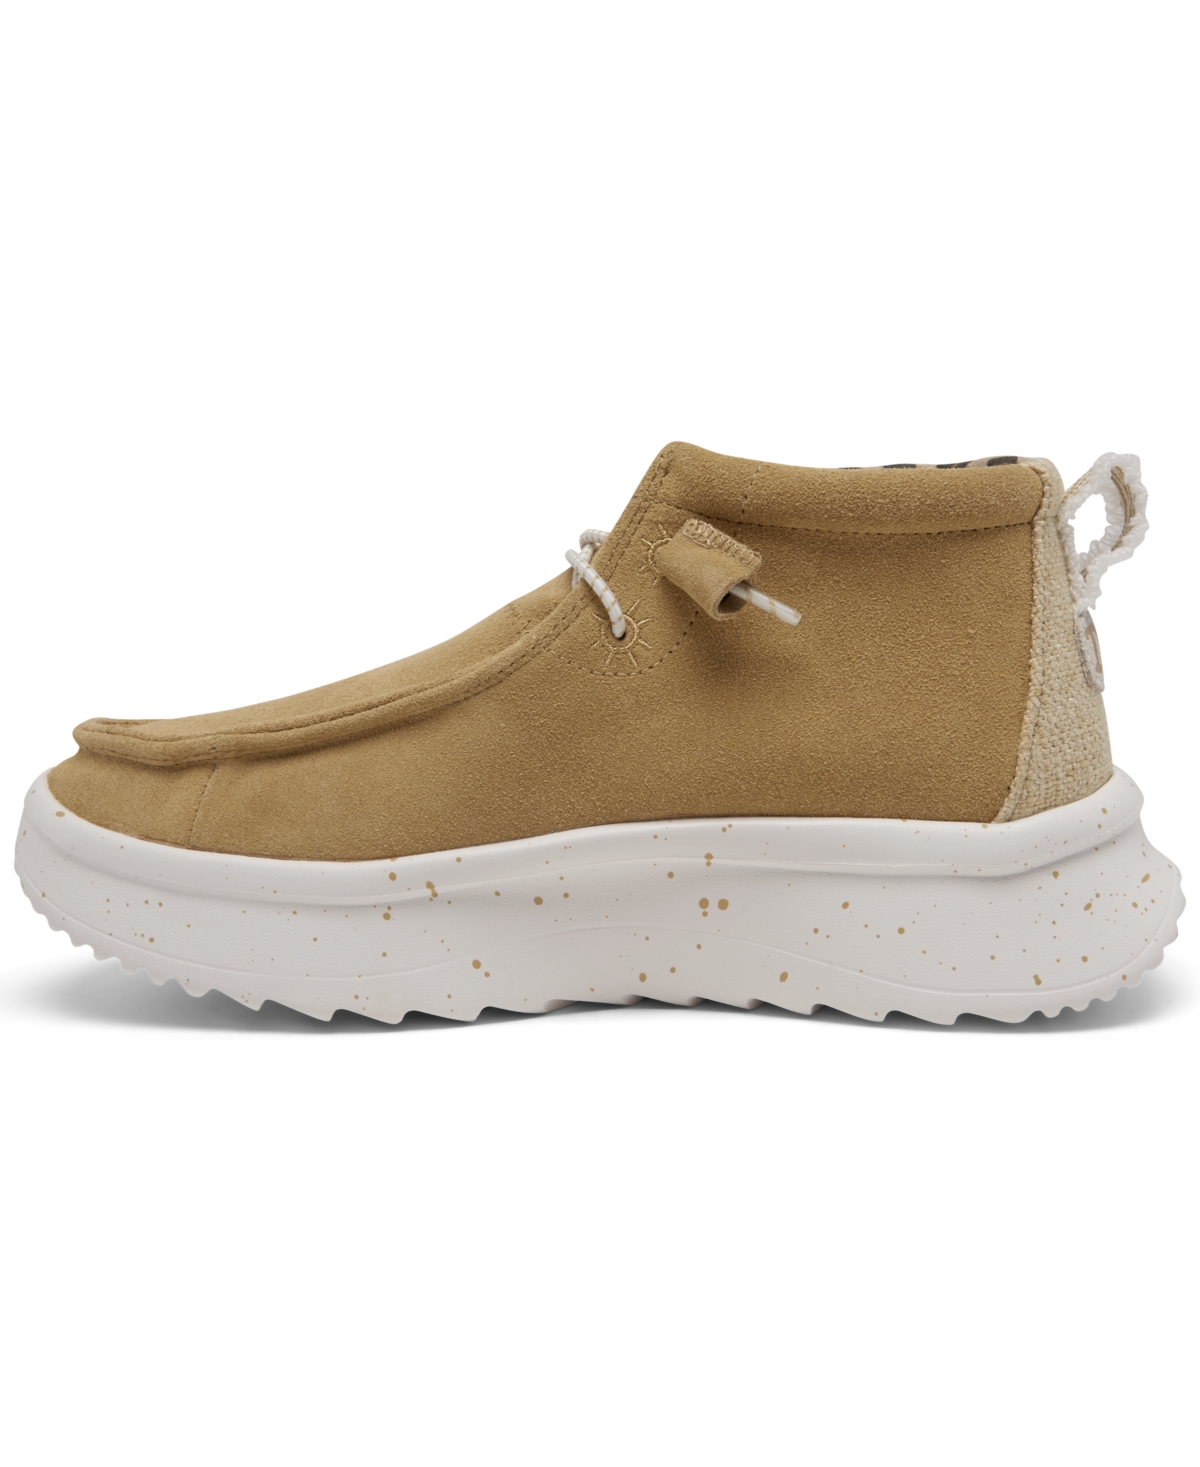 Shop Hey Dude Women's Wendy Peak Hi Suede Casual Moccasin Sneakers From Finish Line In Tan